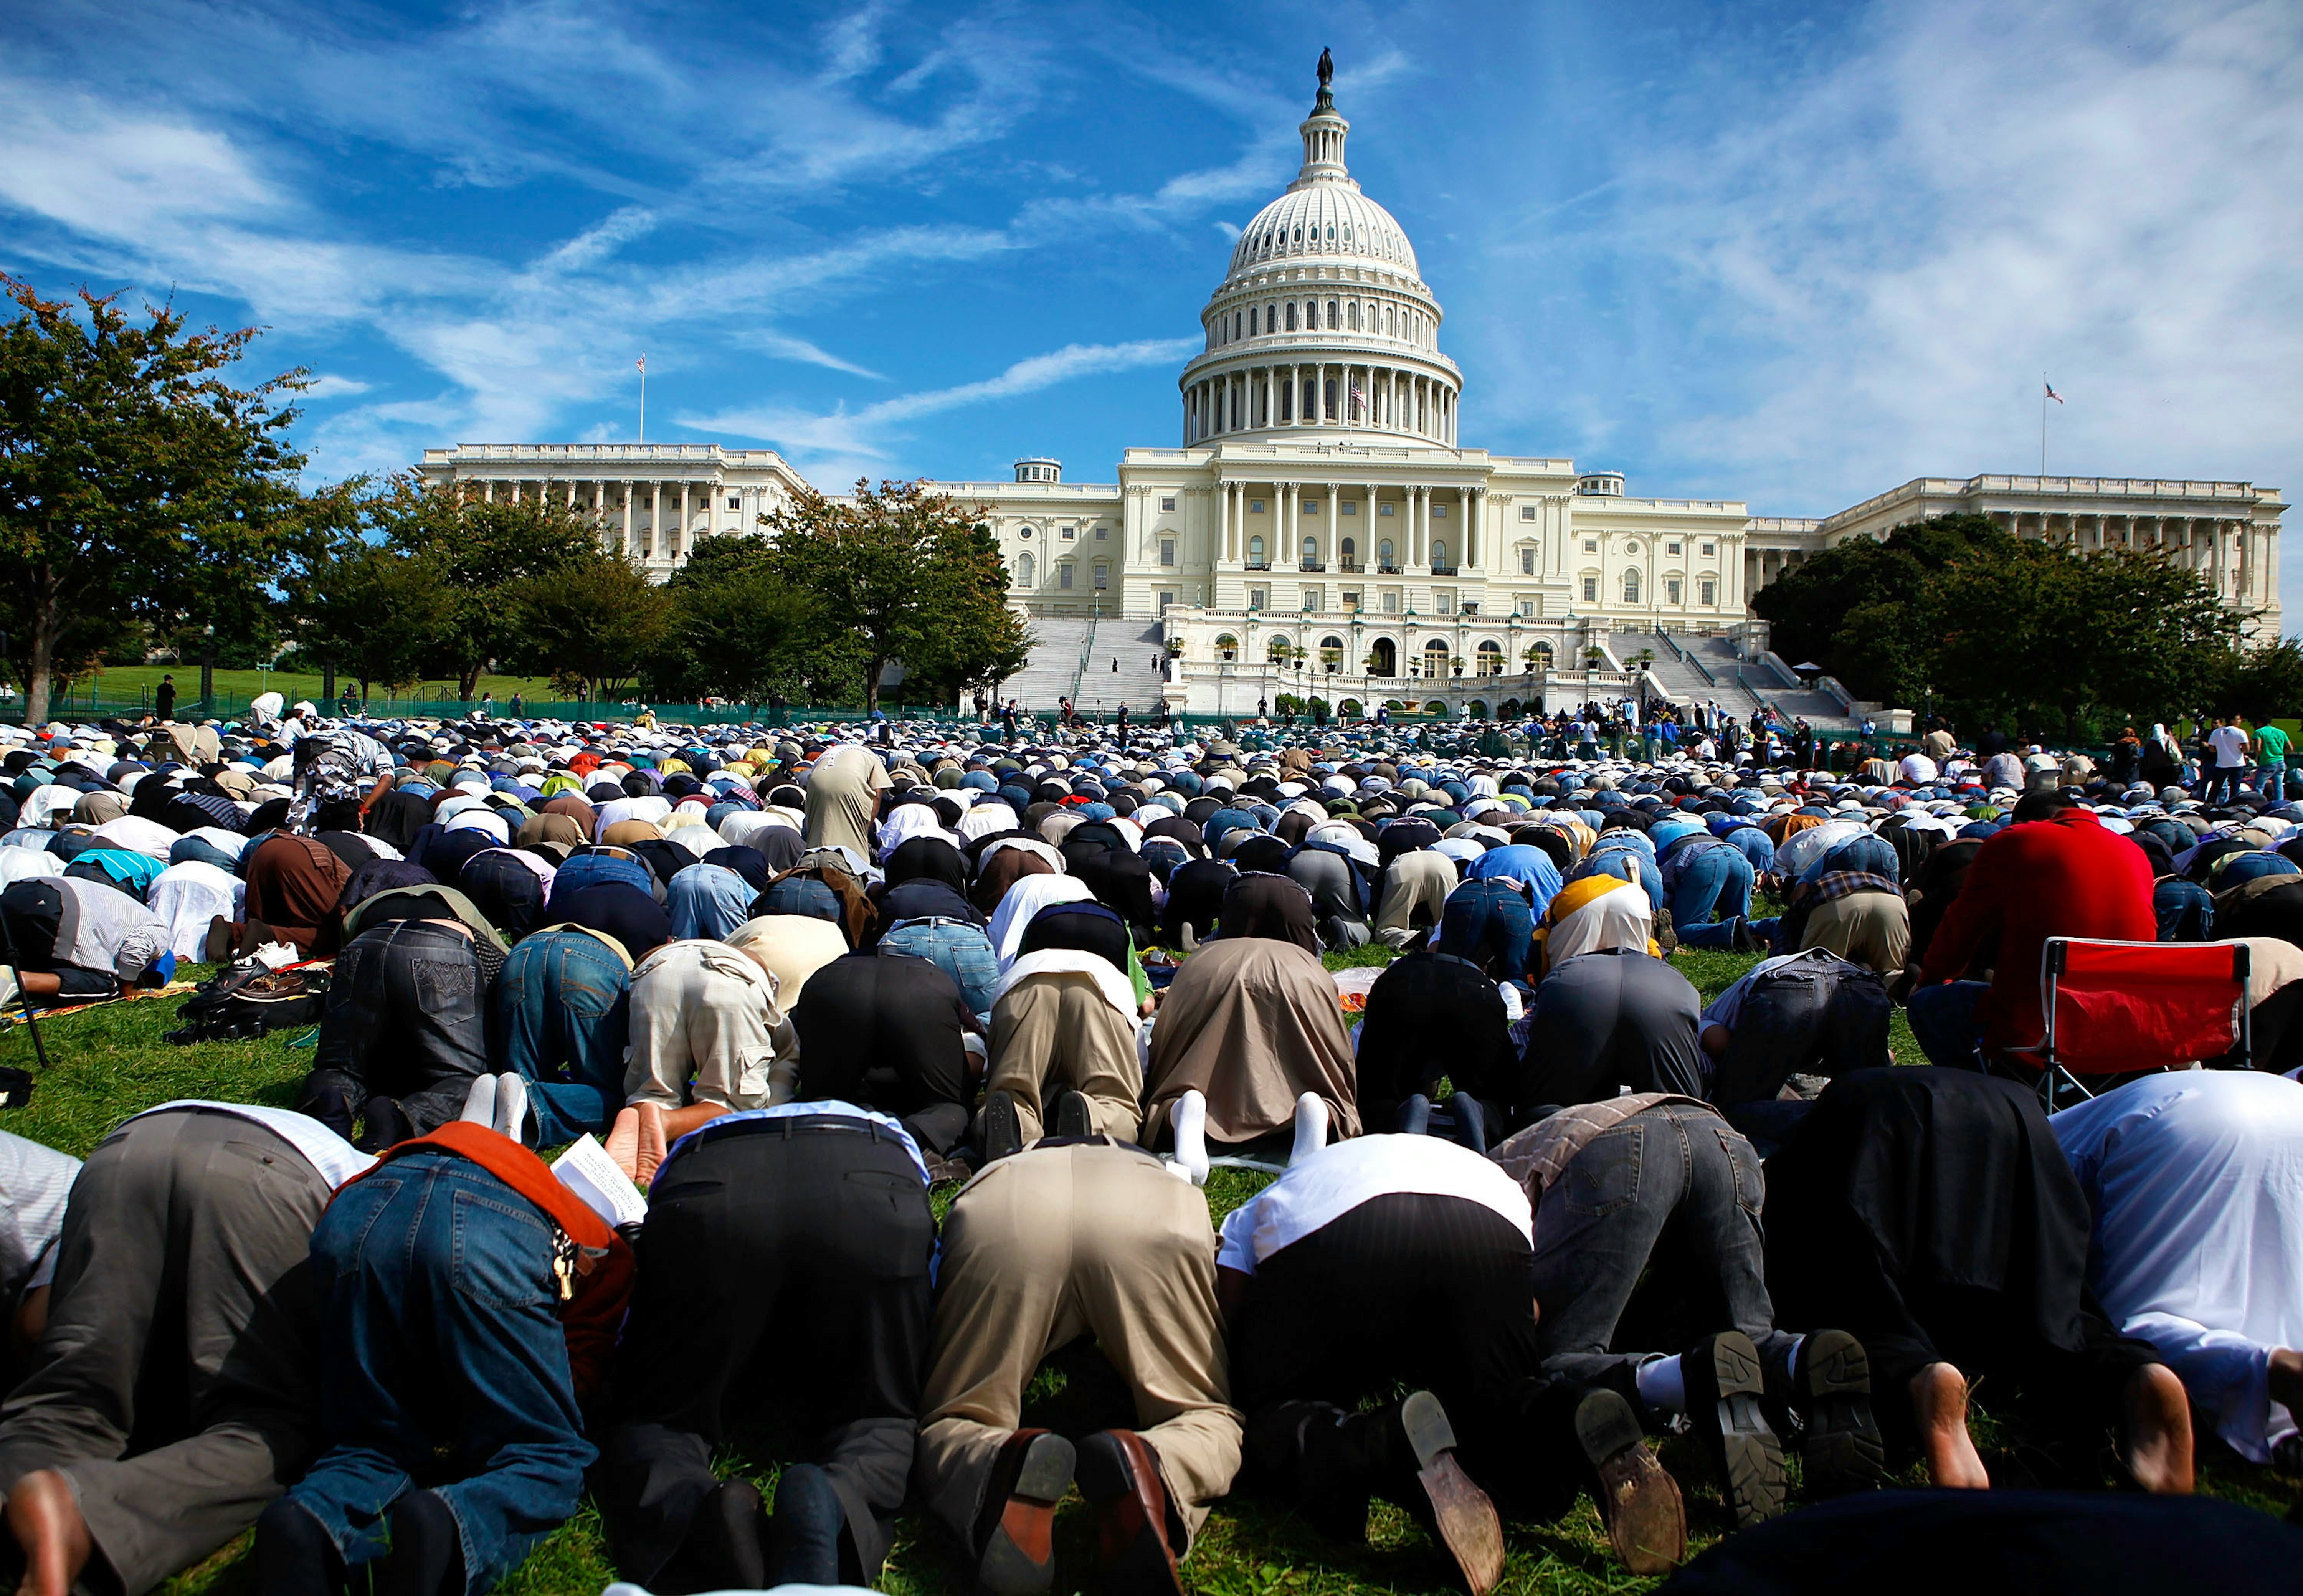 Muslims say prayer during the 'Islam on Capitol Hill 2009' event at the West Front Lawn of the U.S. Capitol September 25, 2009 in Washington, DC. Thousands of Muslims gathered for the event to promote the diversity of Islam.